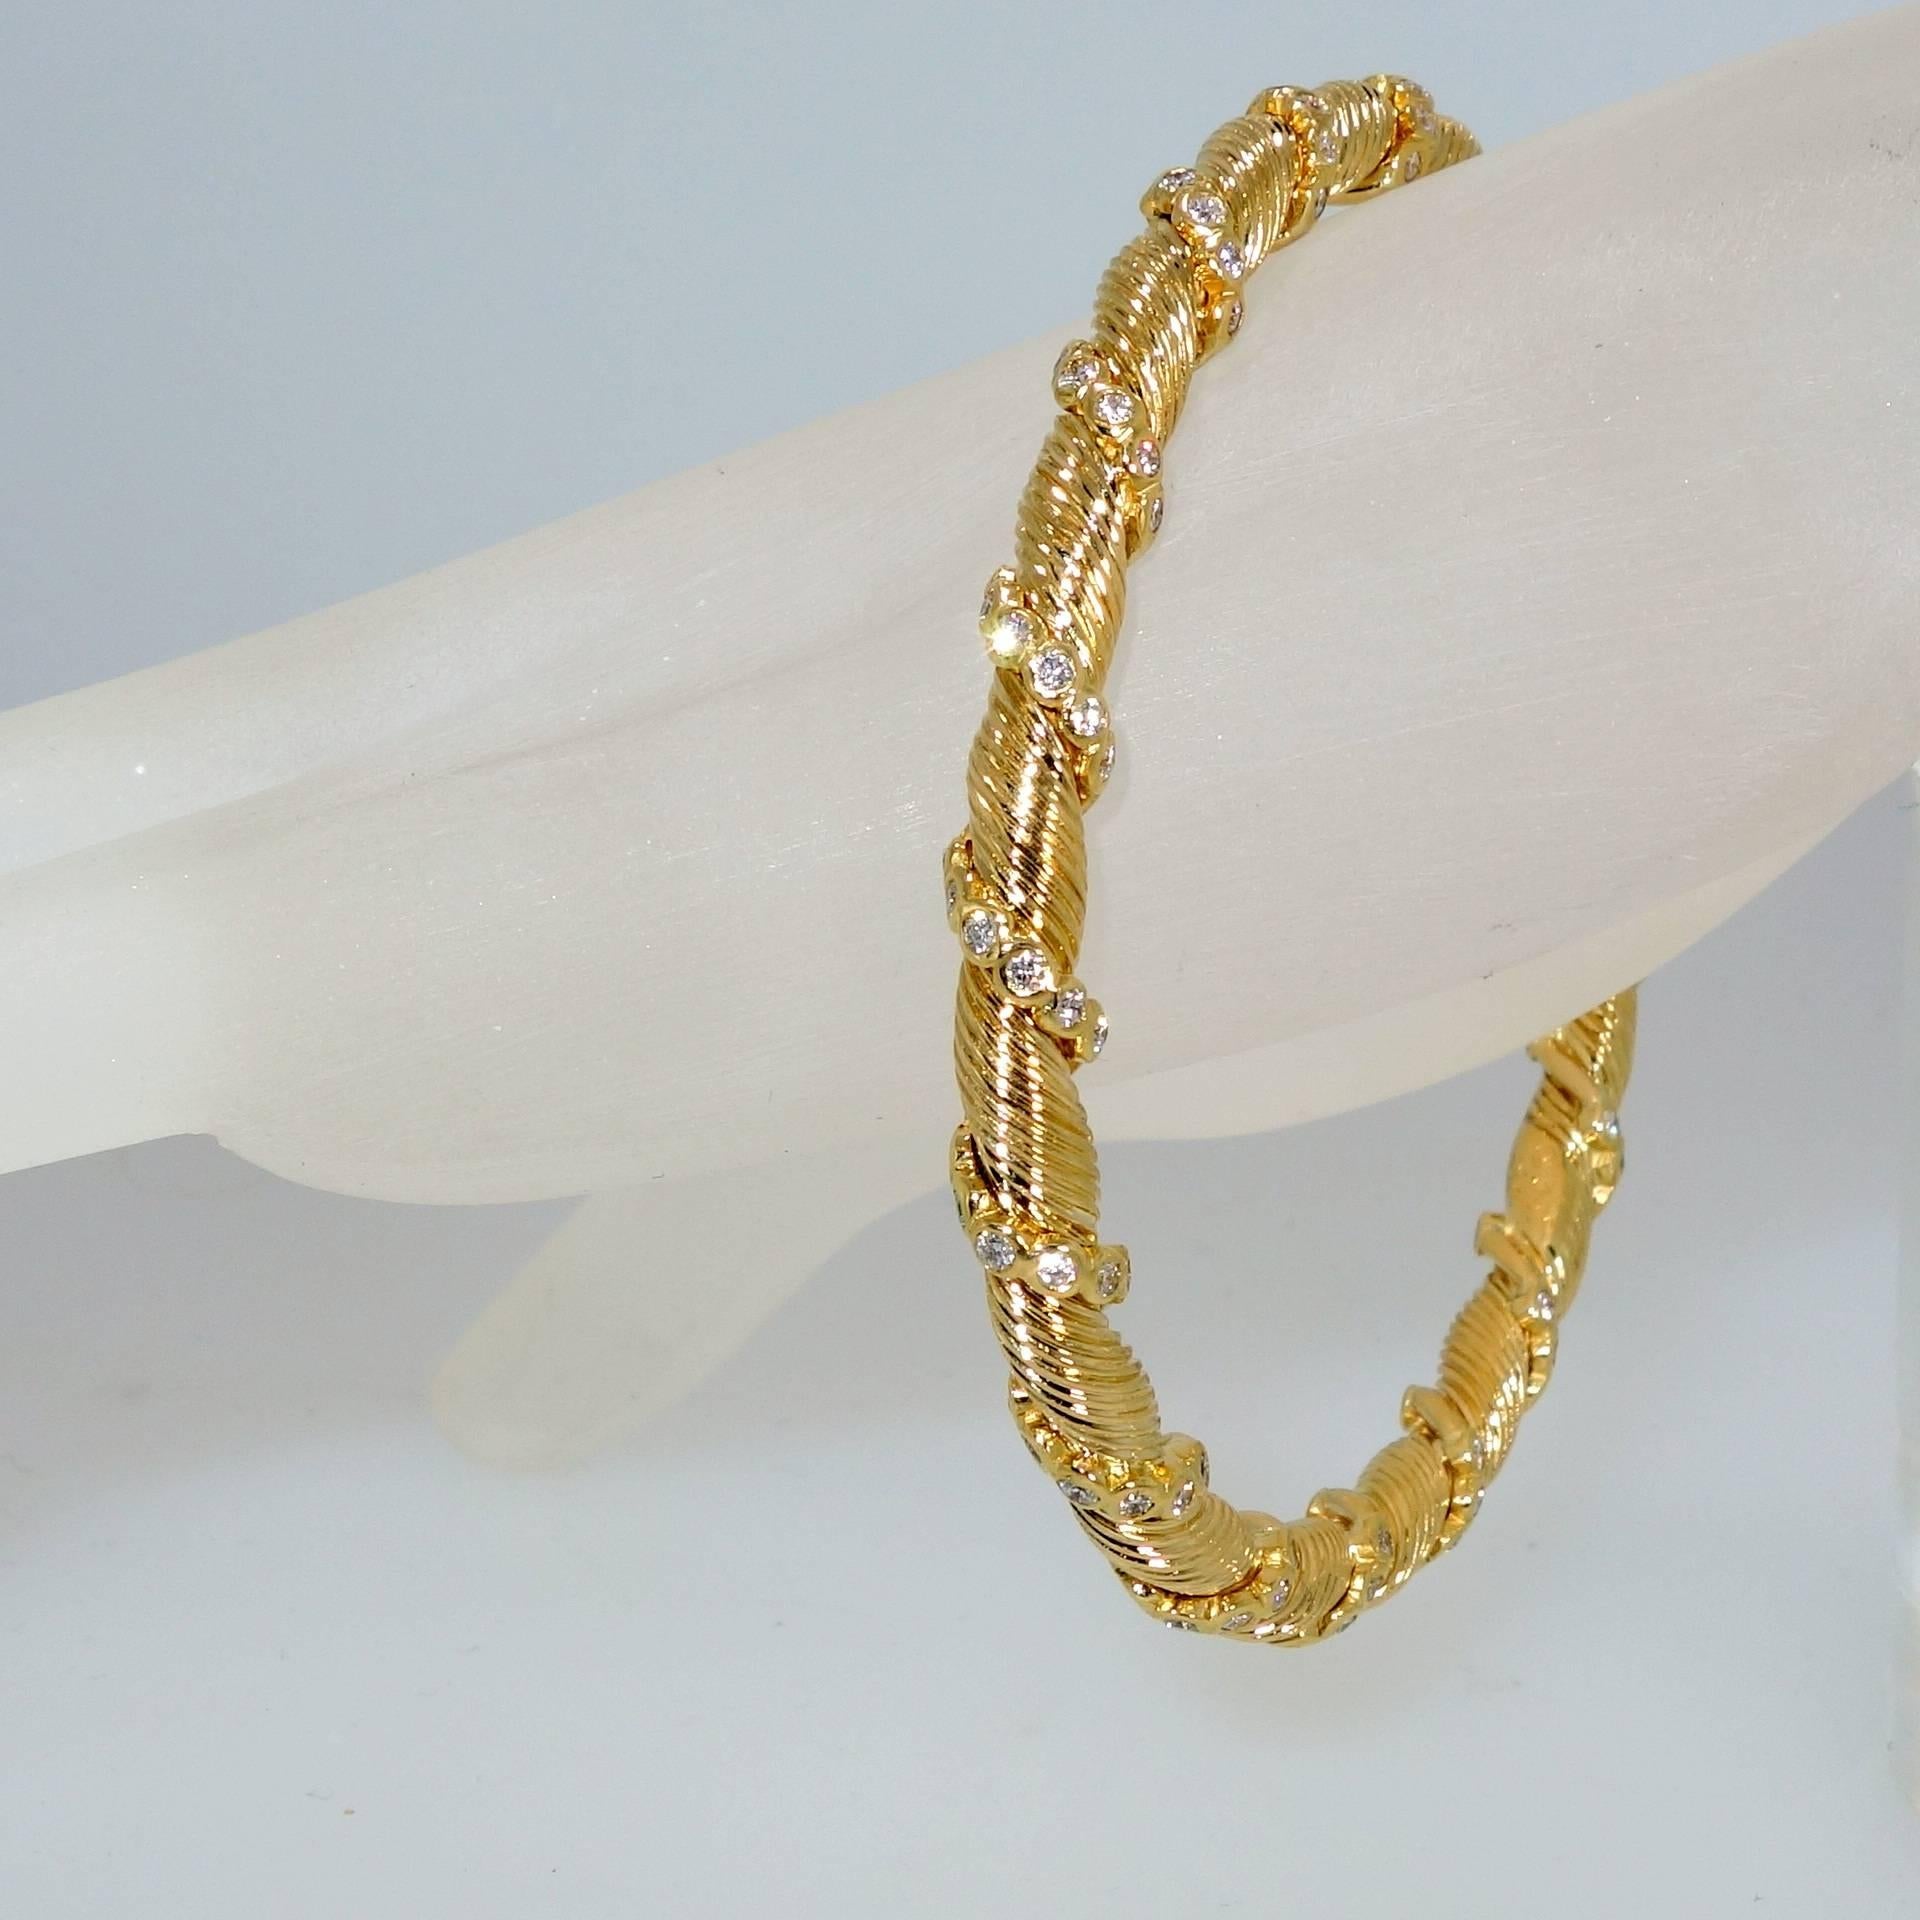 18K yellow gold bangle with 126 round diamonds with an approximately 3.0 cts. of fine white diamonds.  The bangle has an interior measures 2.5 by 2.25 inches and as an oval shape the interior circumference is 7.5 inches.  The weight is 26.18 grams.